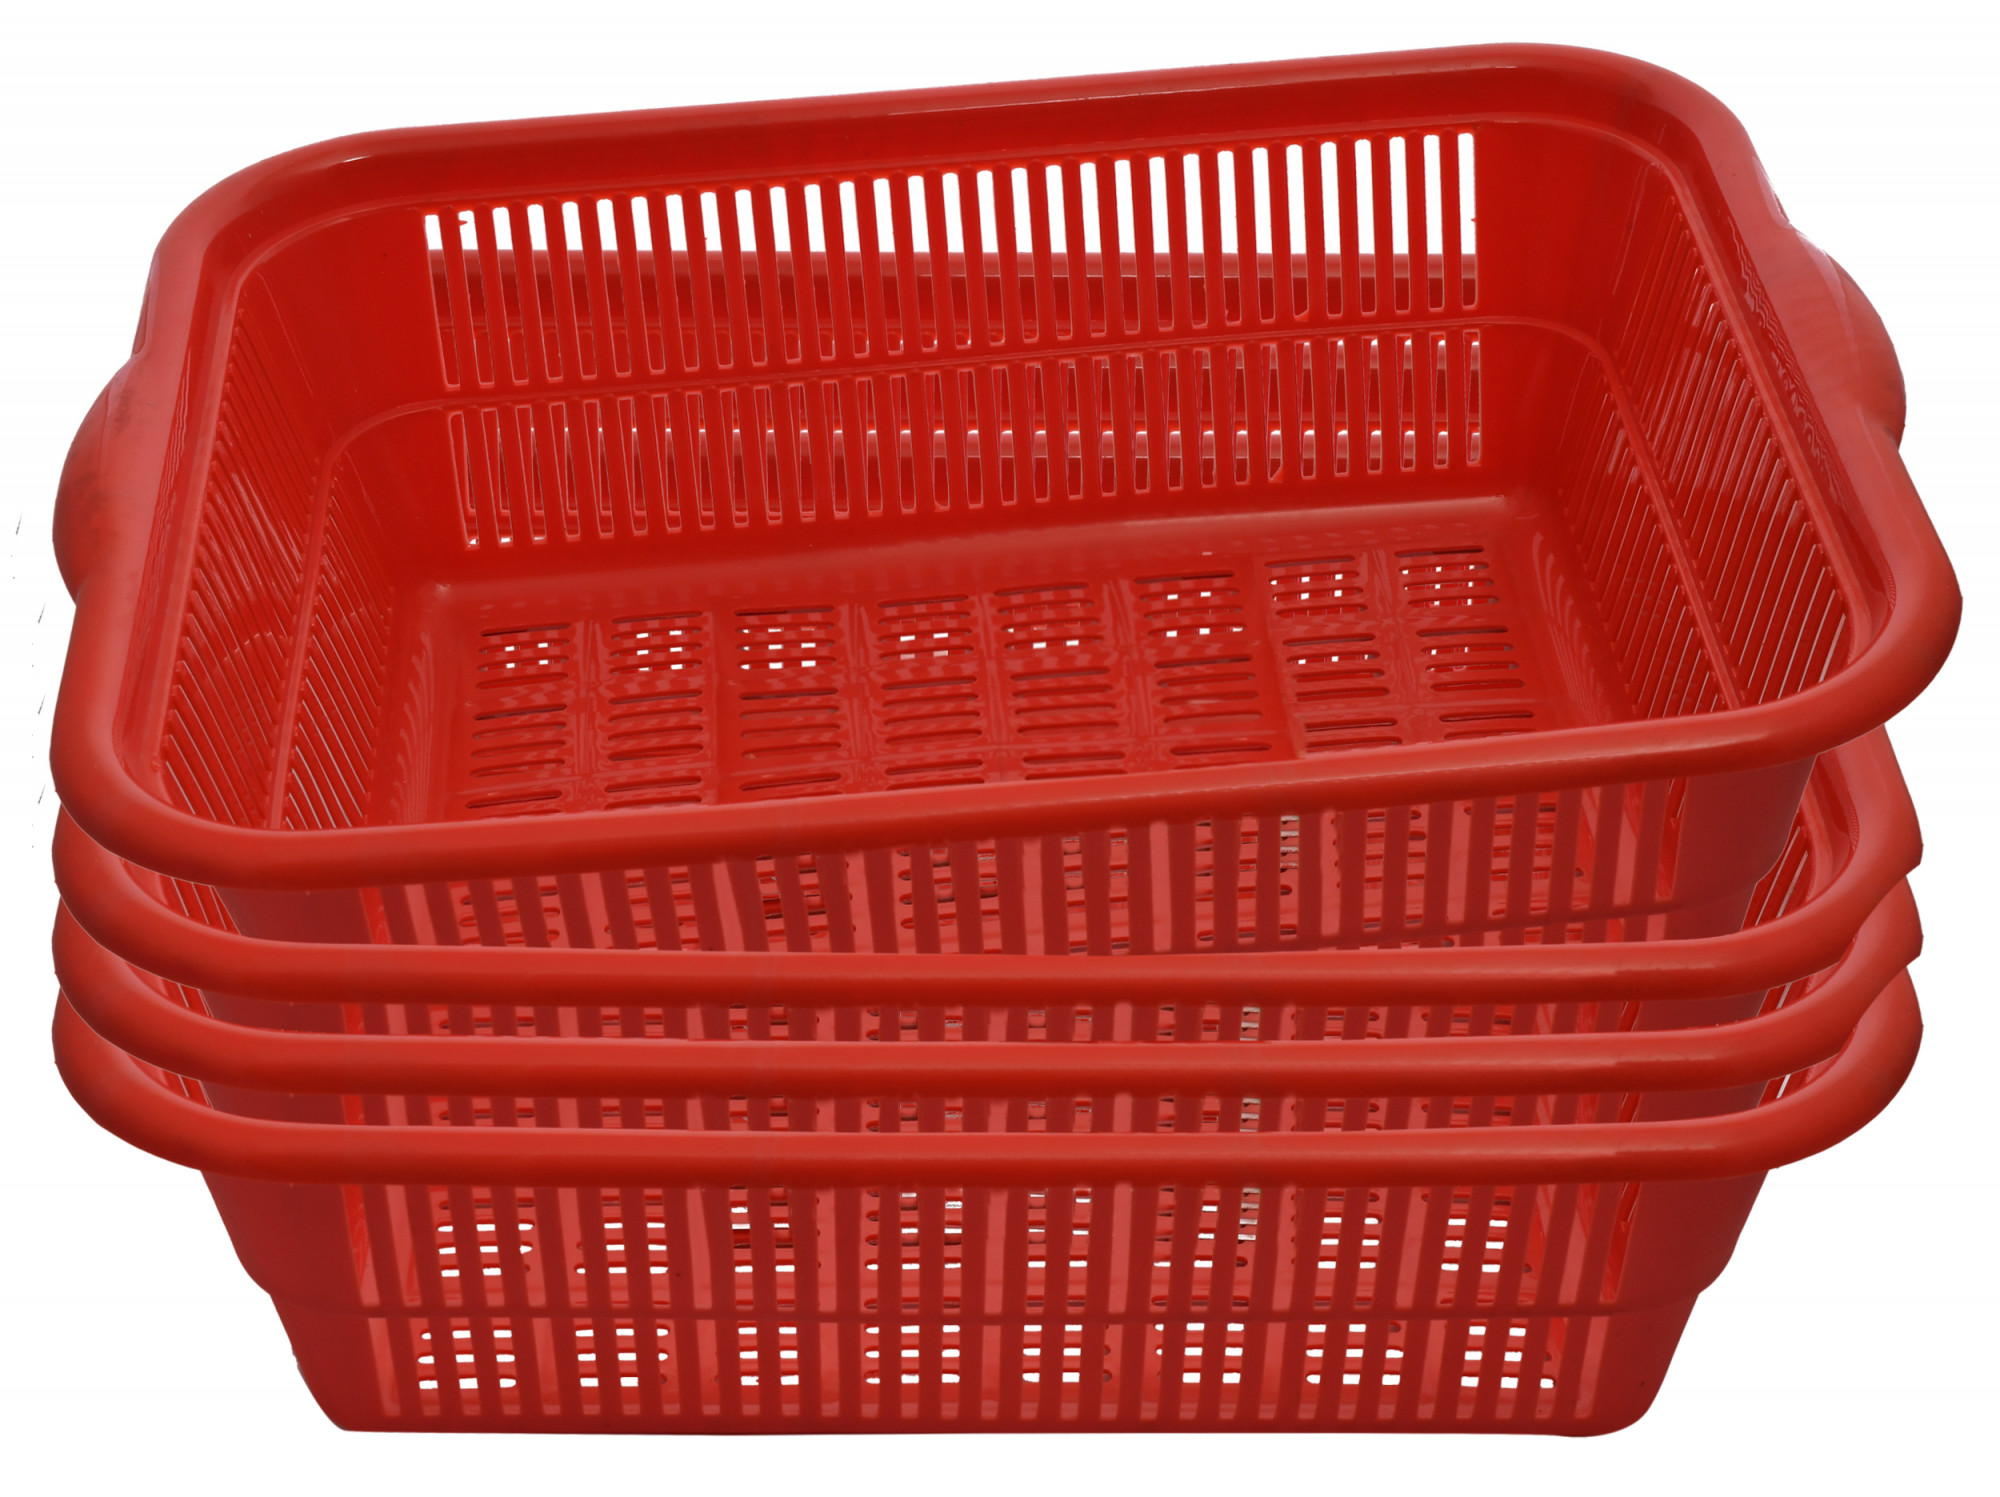 Kuber Industries 4 Pieces Plastic Kitchen Dish Rack Drainer Vegetables And Fruits Basket Dish Rack Multipurpose Organizers ,Medium Size,Red